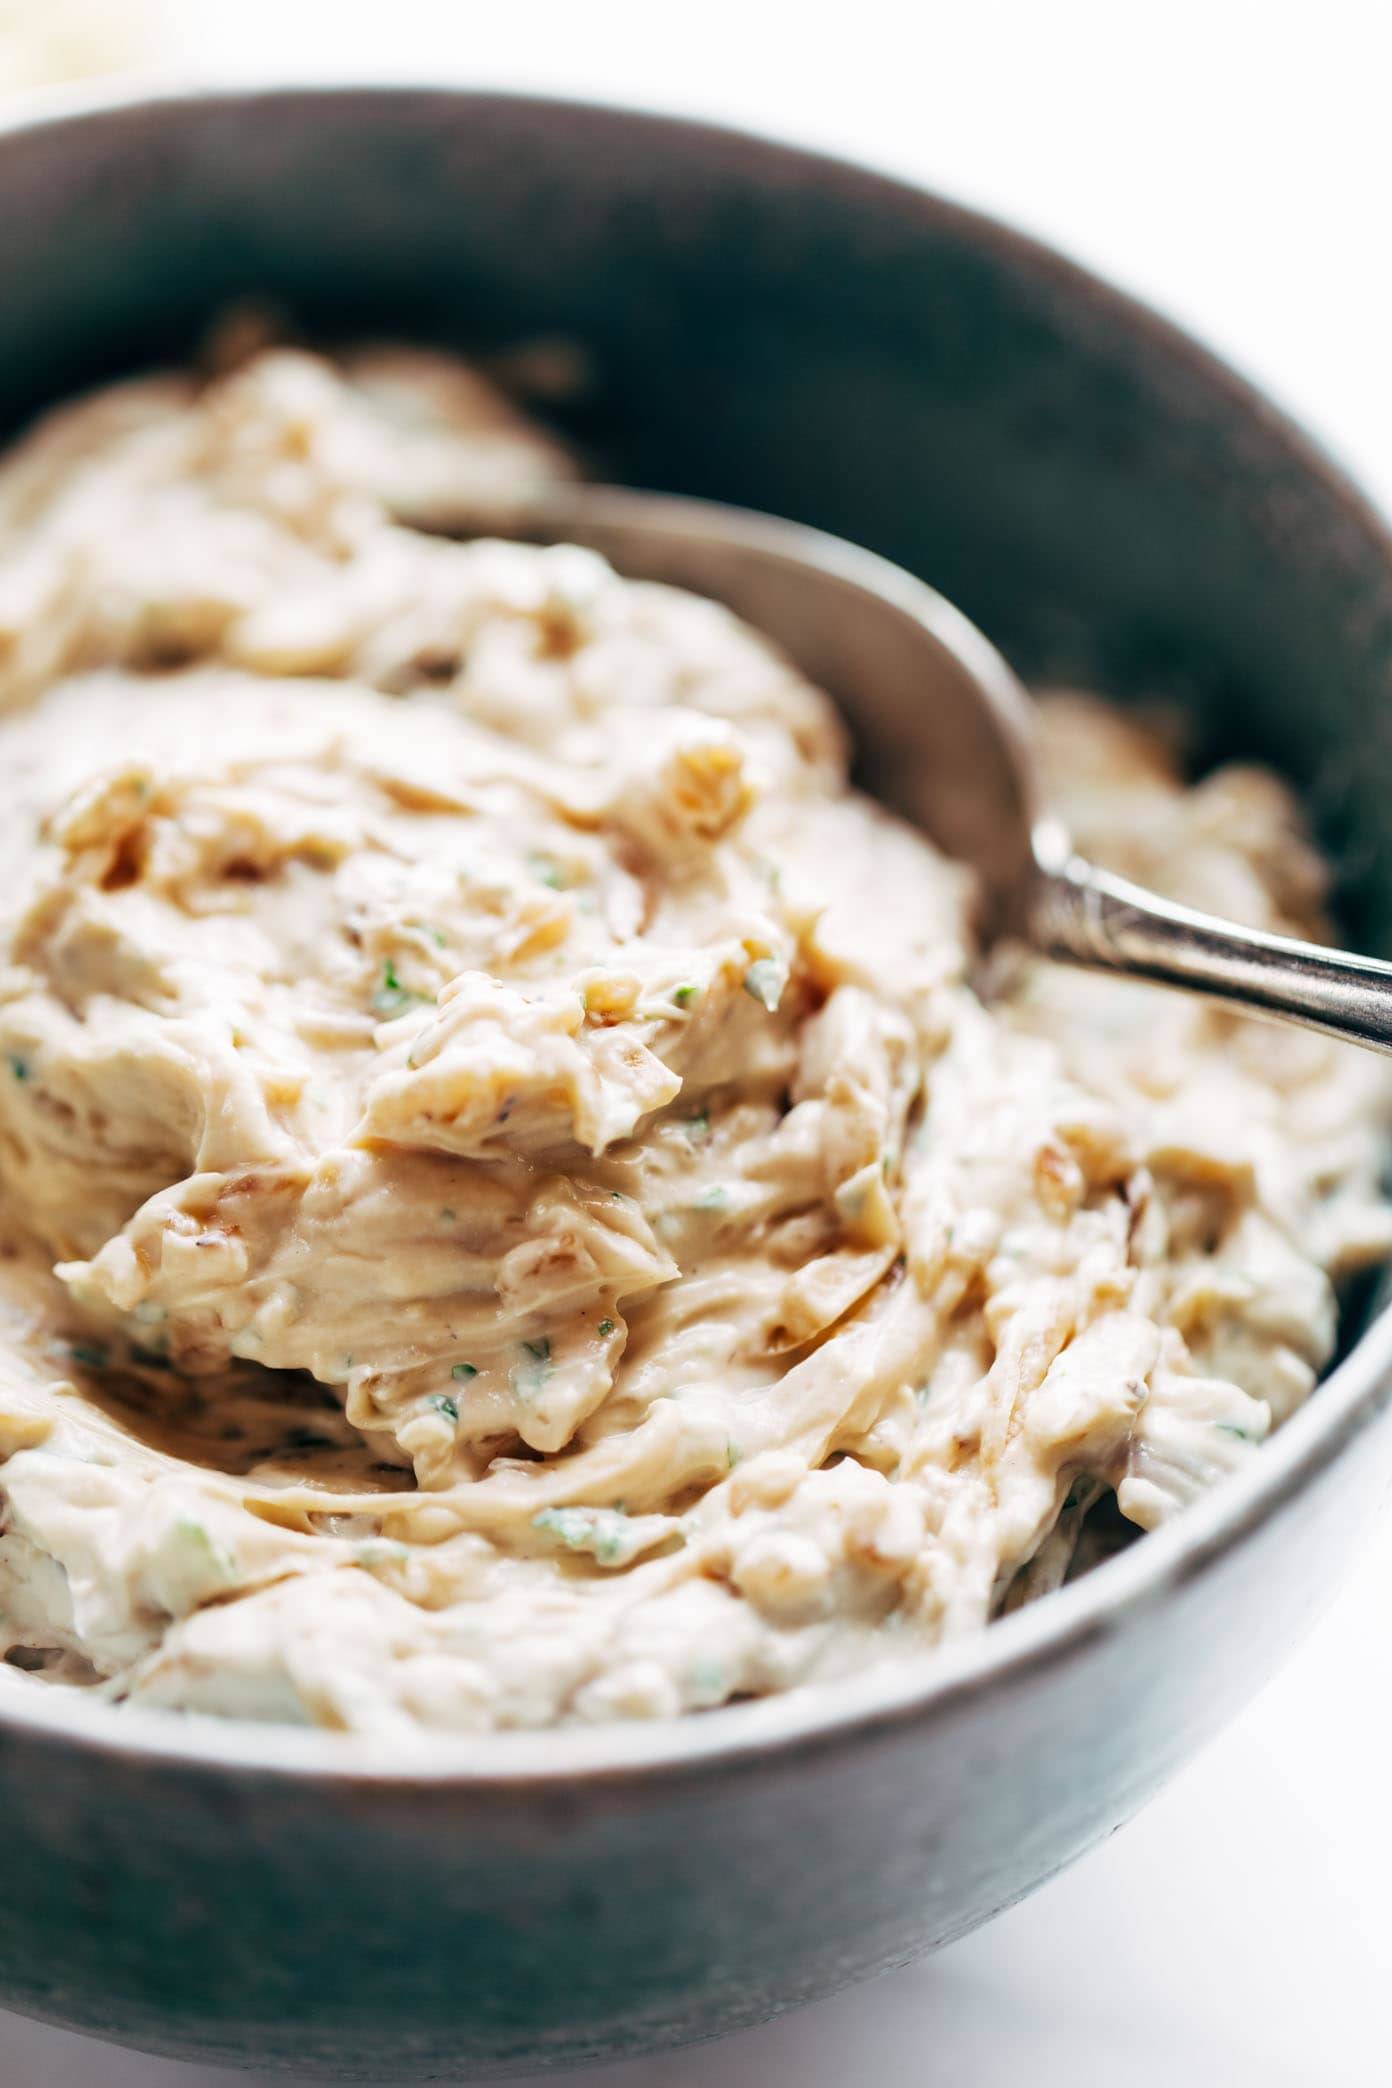 Caramelized Onion Dip in a bowl with a spoon.